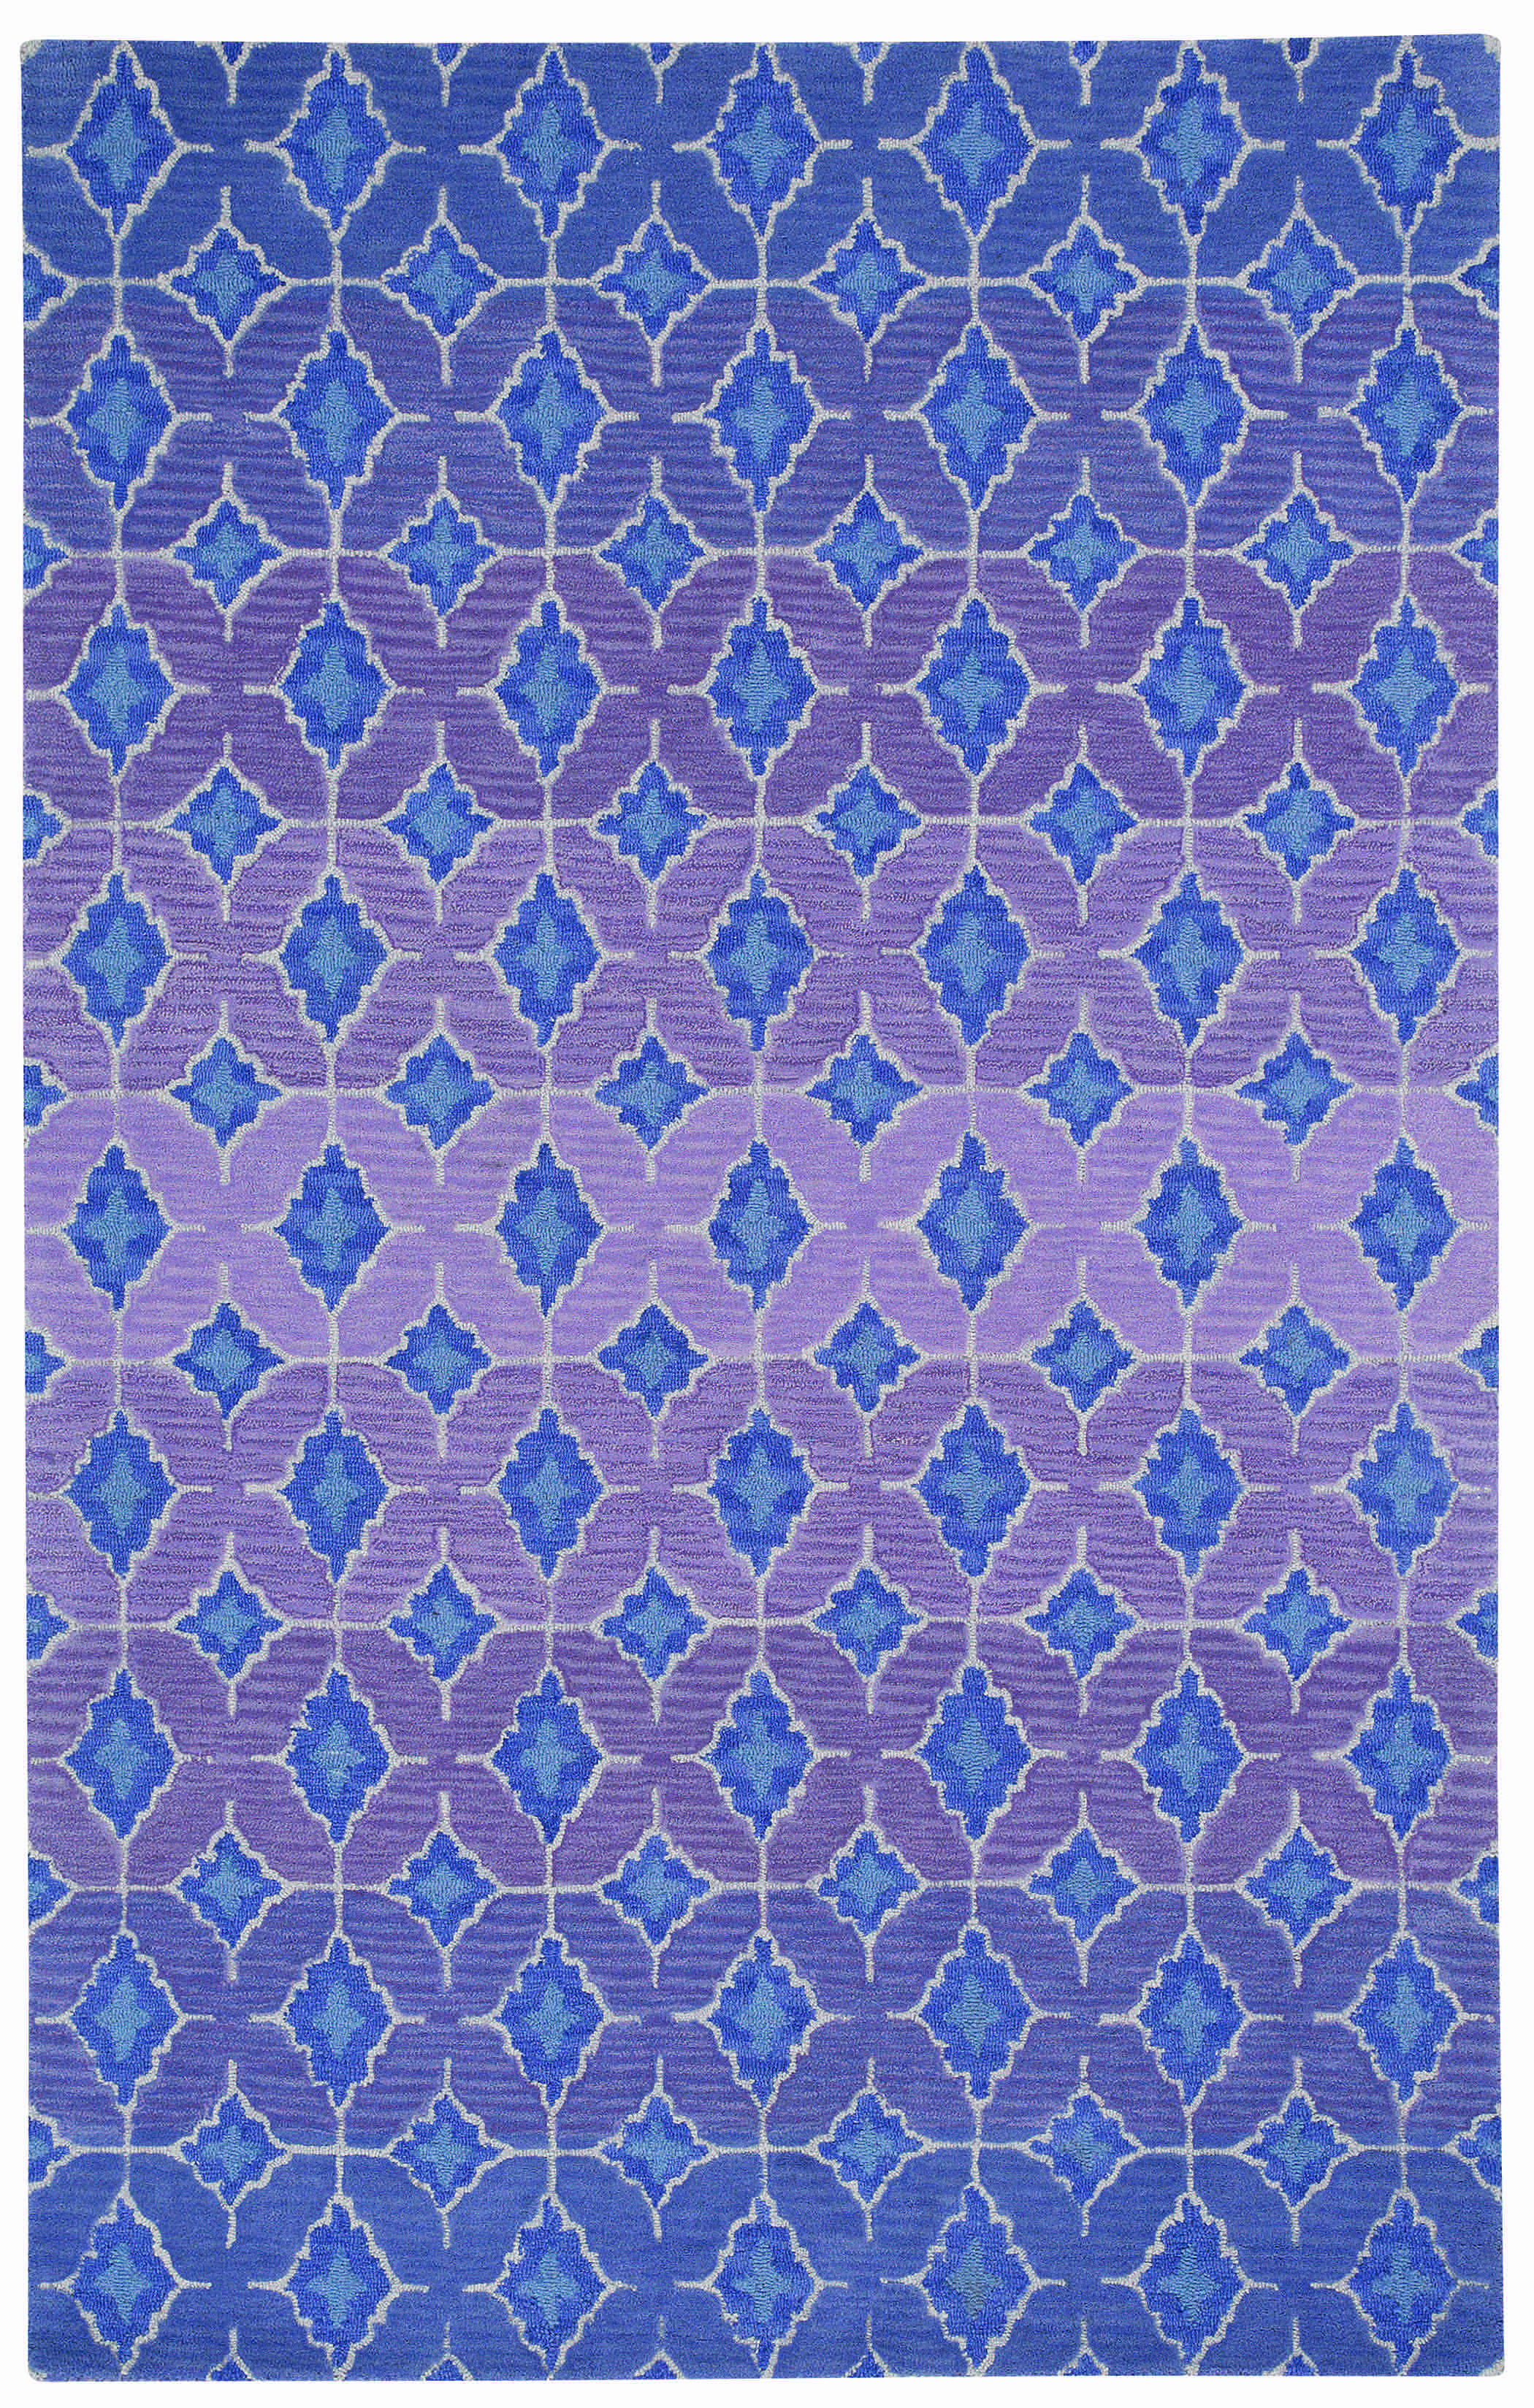 Lisbon area rug with indigo, wild violet and azul coloways designed by Kevin O'Brien for Capel Rugs